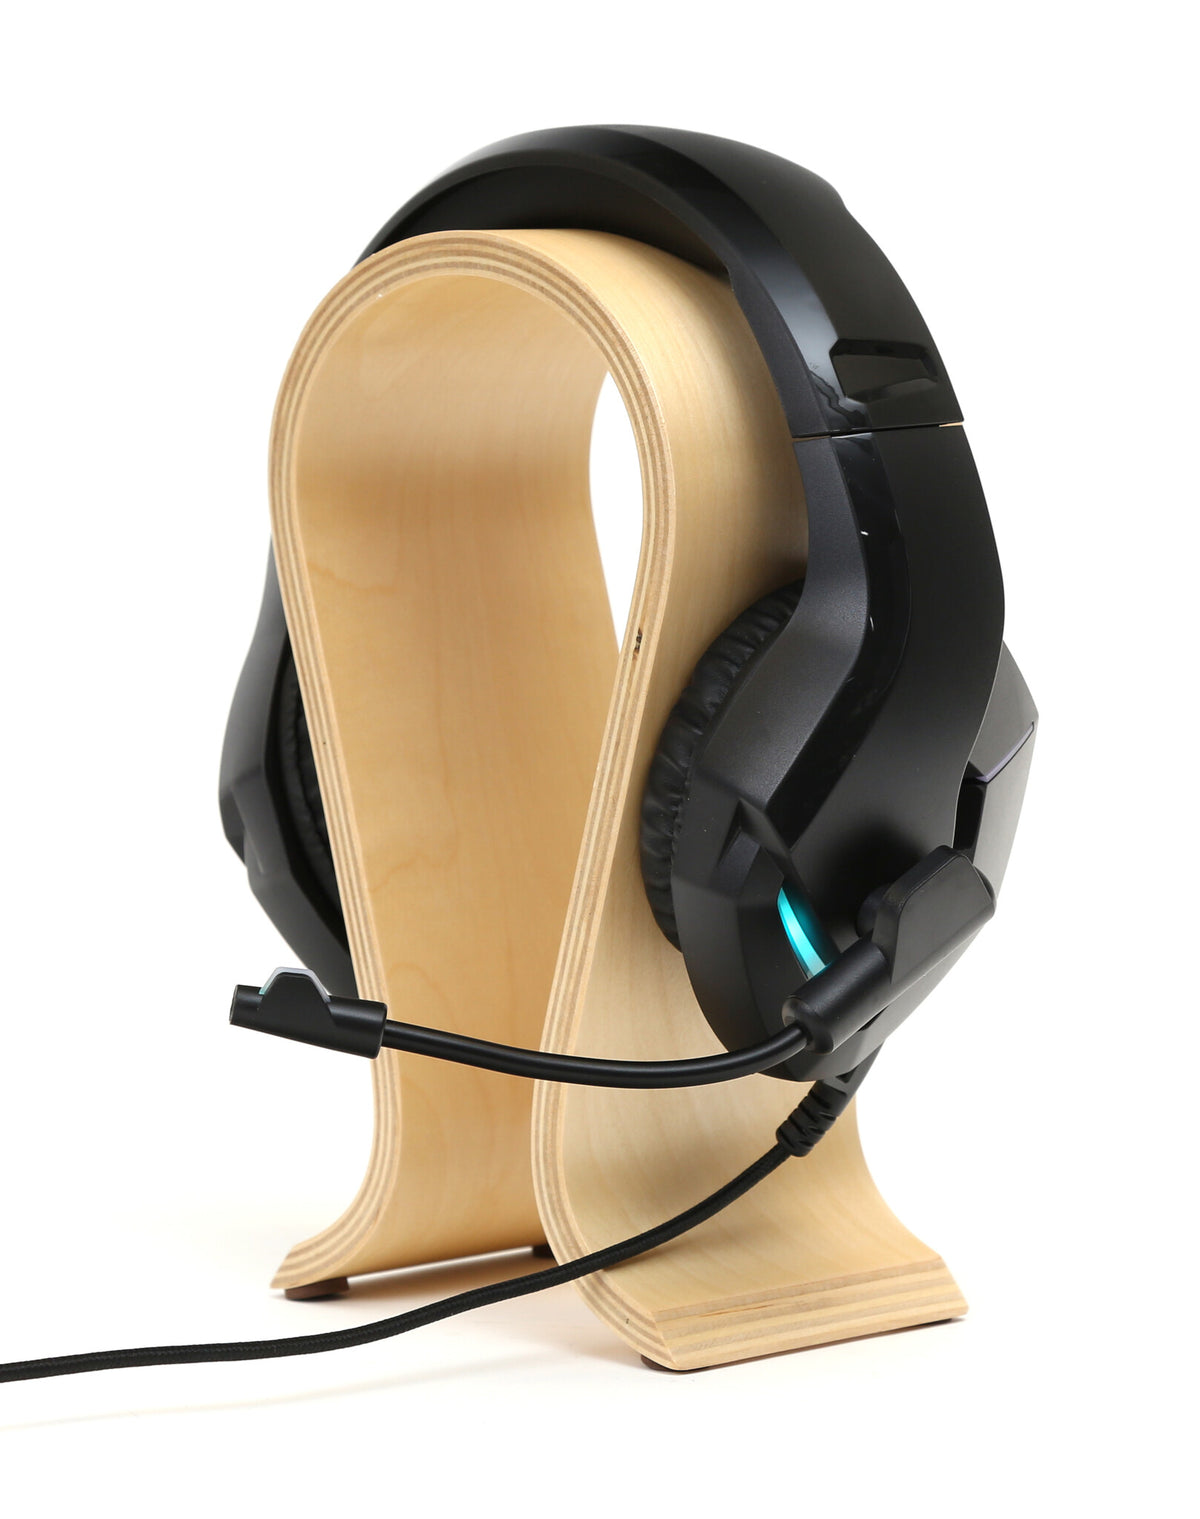 Varr Pro RGB Gaming - 3.5mm Wired Headset